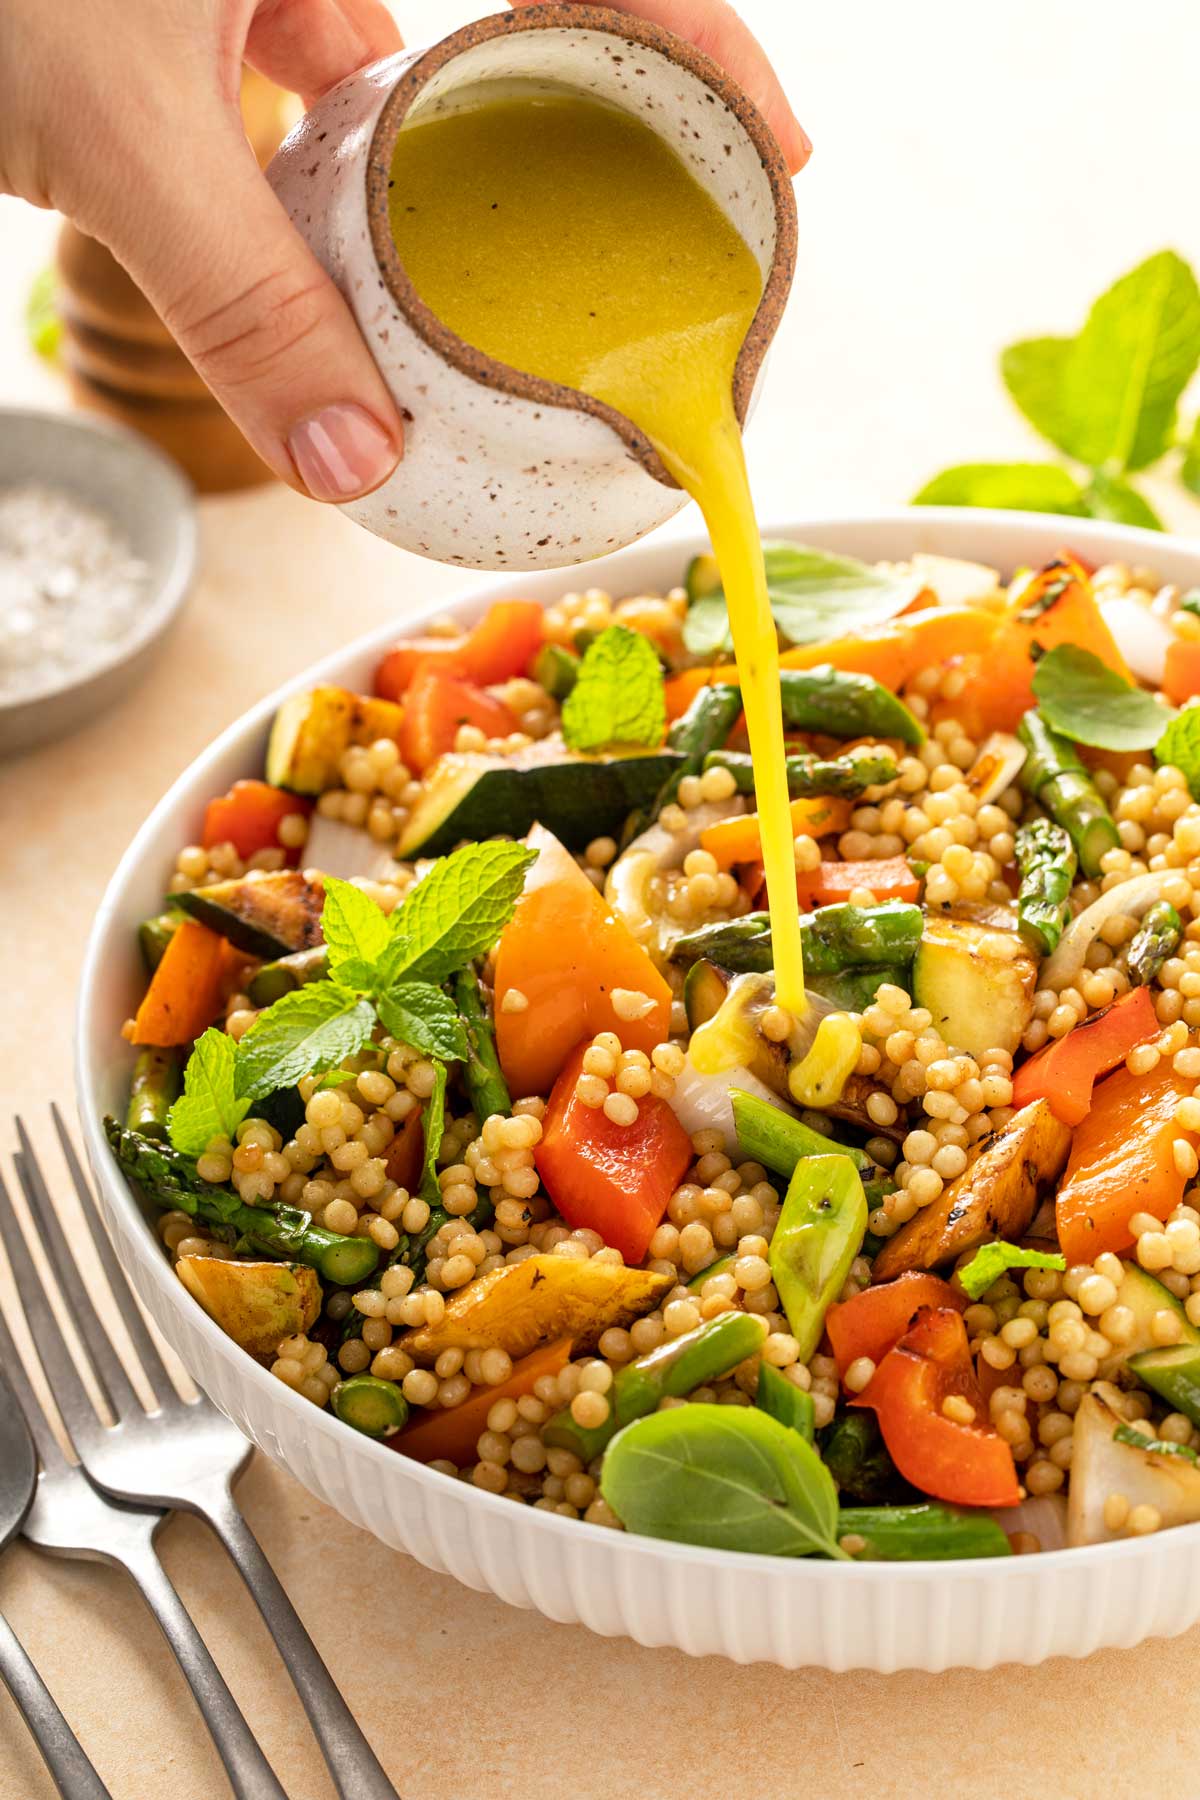 A white bowl filled with couscous salad and grilled veggies.